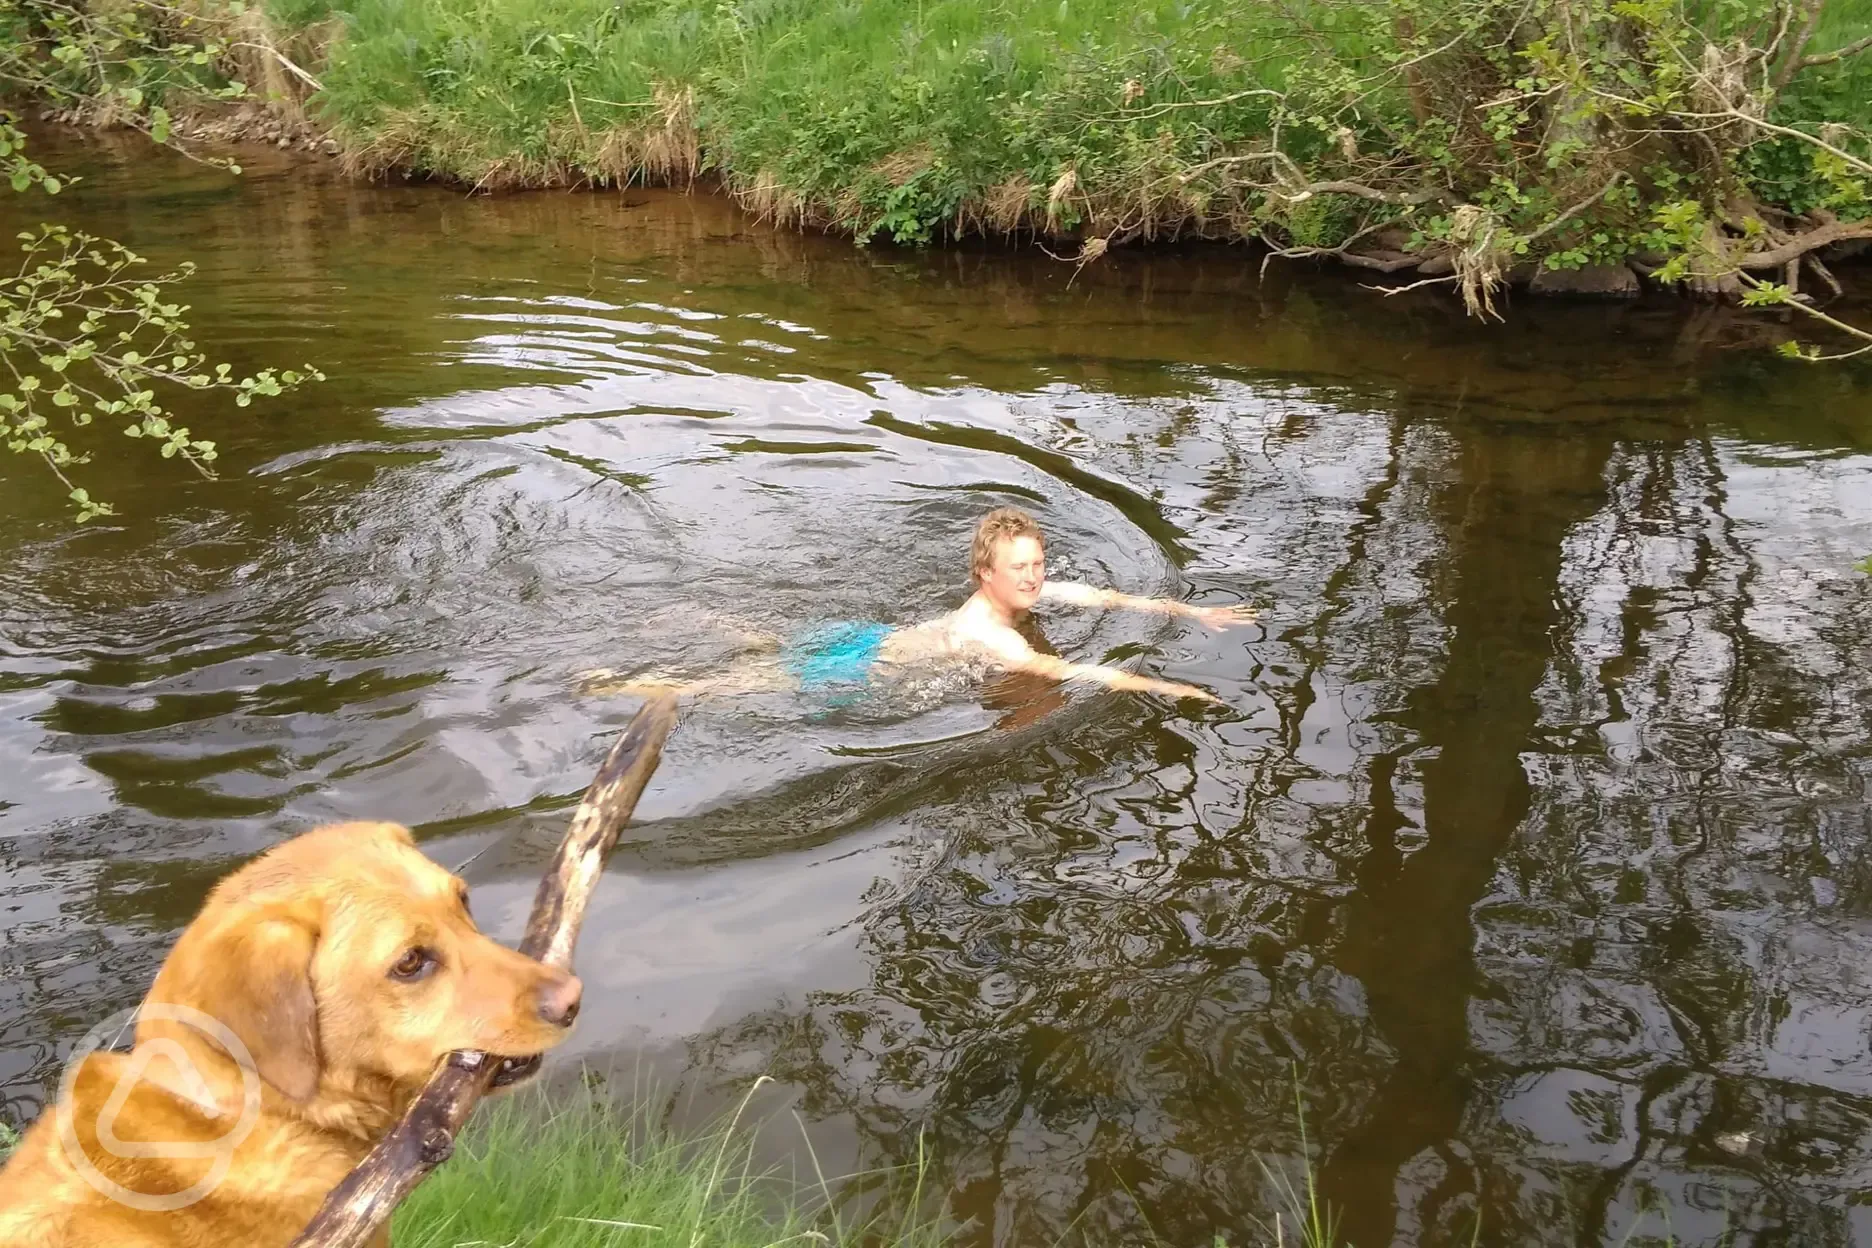 Swimming in the river with dogs welcome